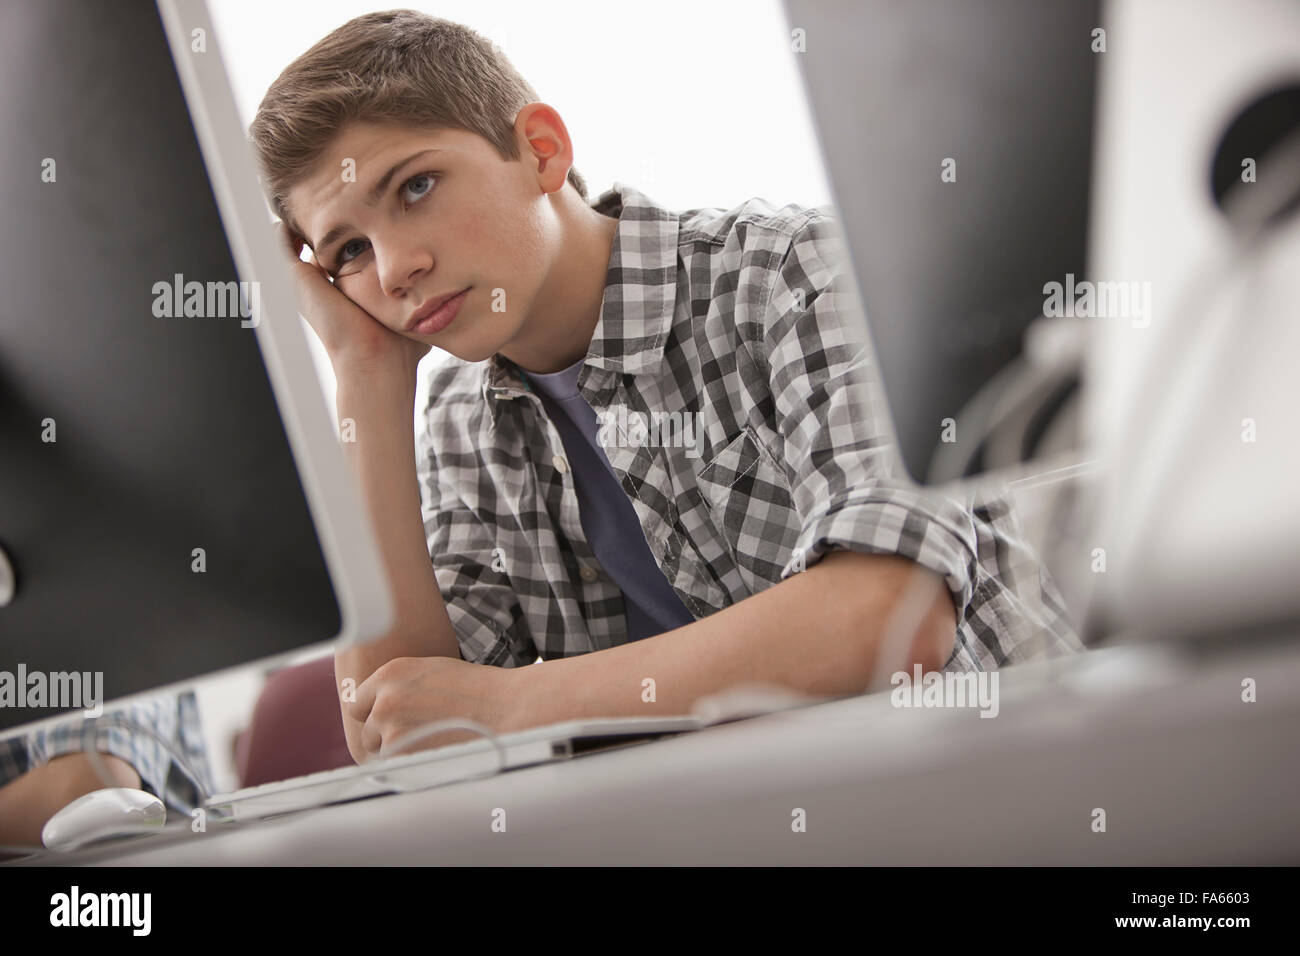 A school room computer laboratory or lab with rows of computer monitors and seating. boy sitting with his hand on his chin Stock Photo